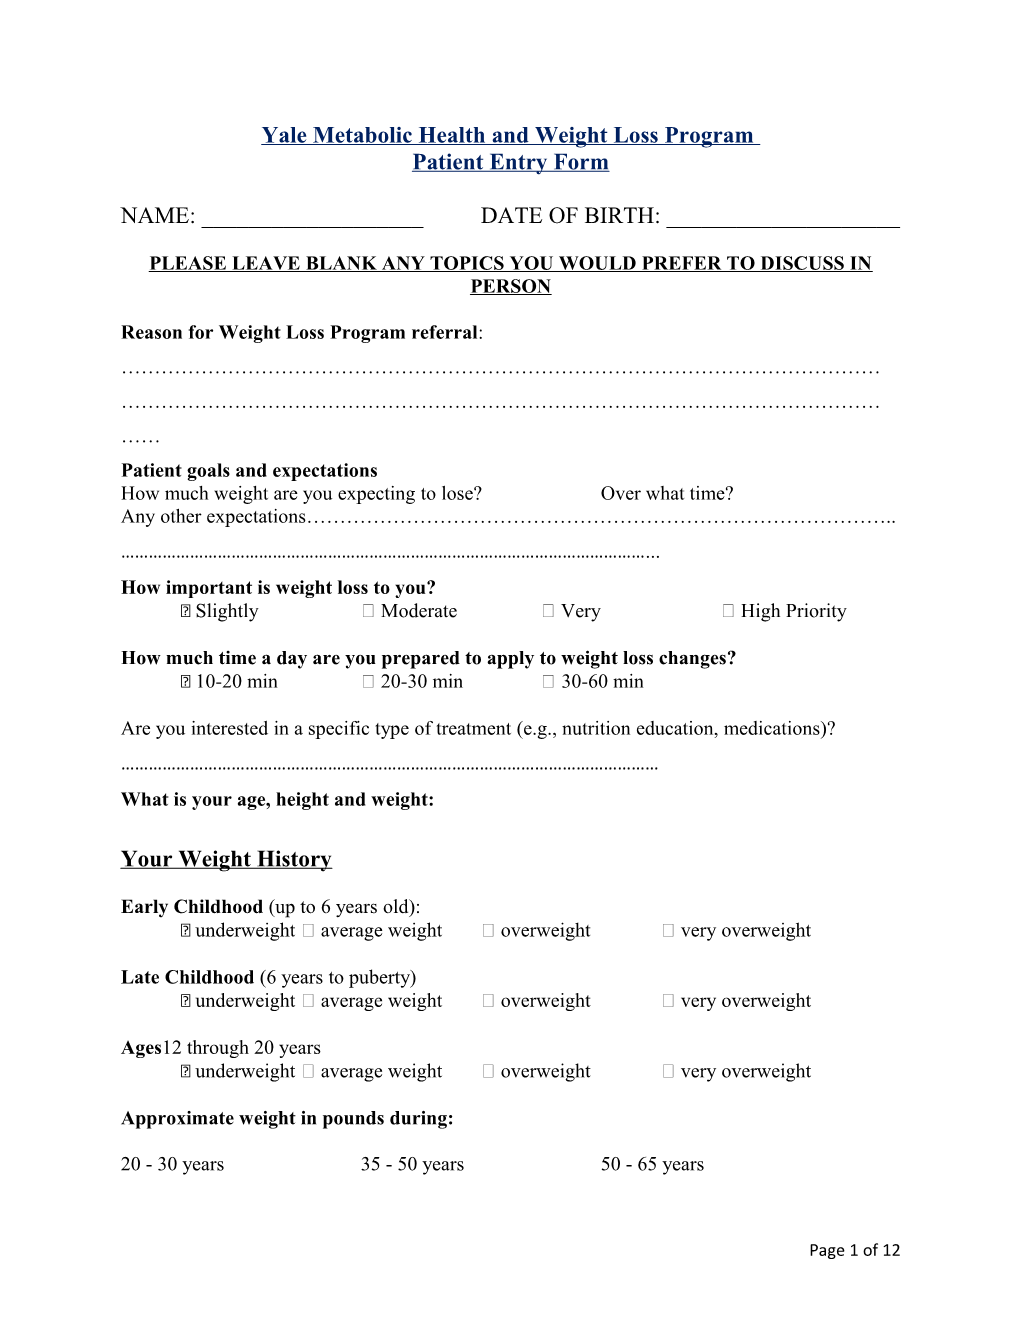 Yale Metabolic Health and Weight Loss Program Patient Entry Form